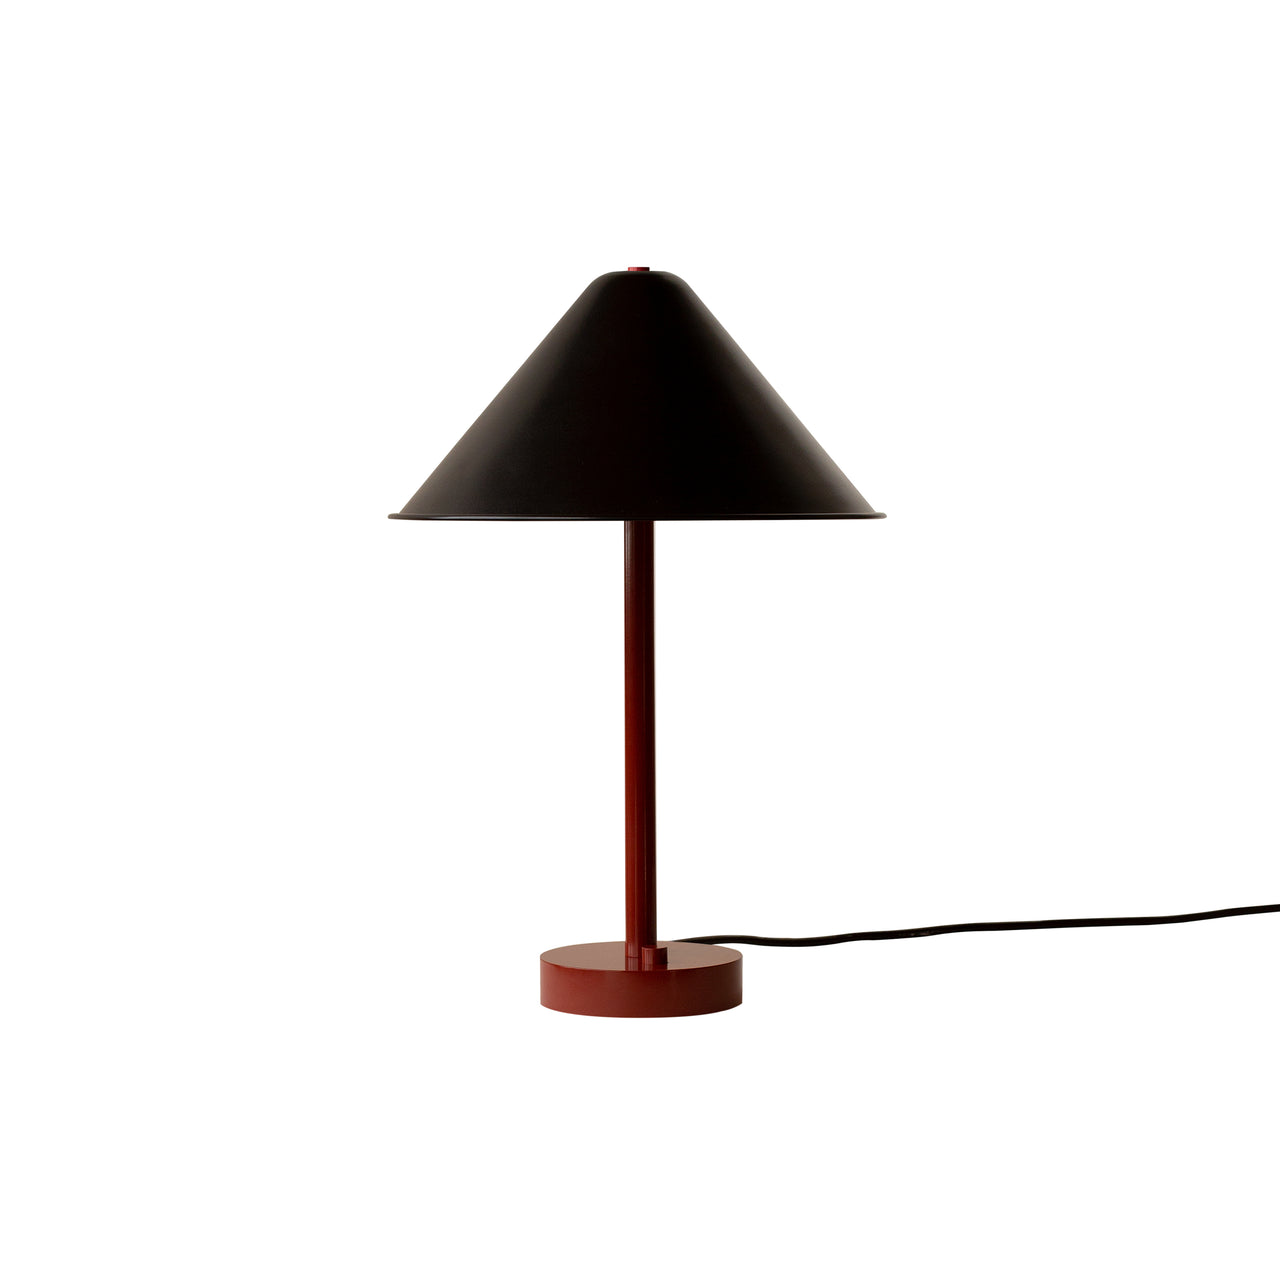 Eave Table Lamp: Black + Oxide Red